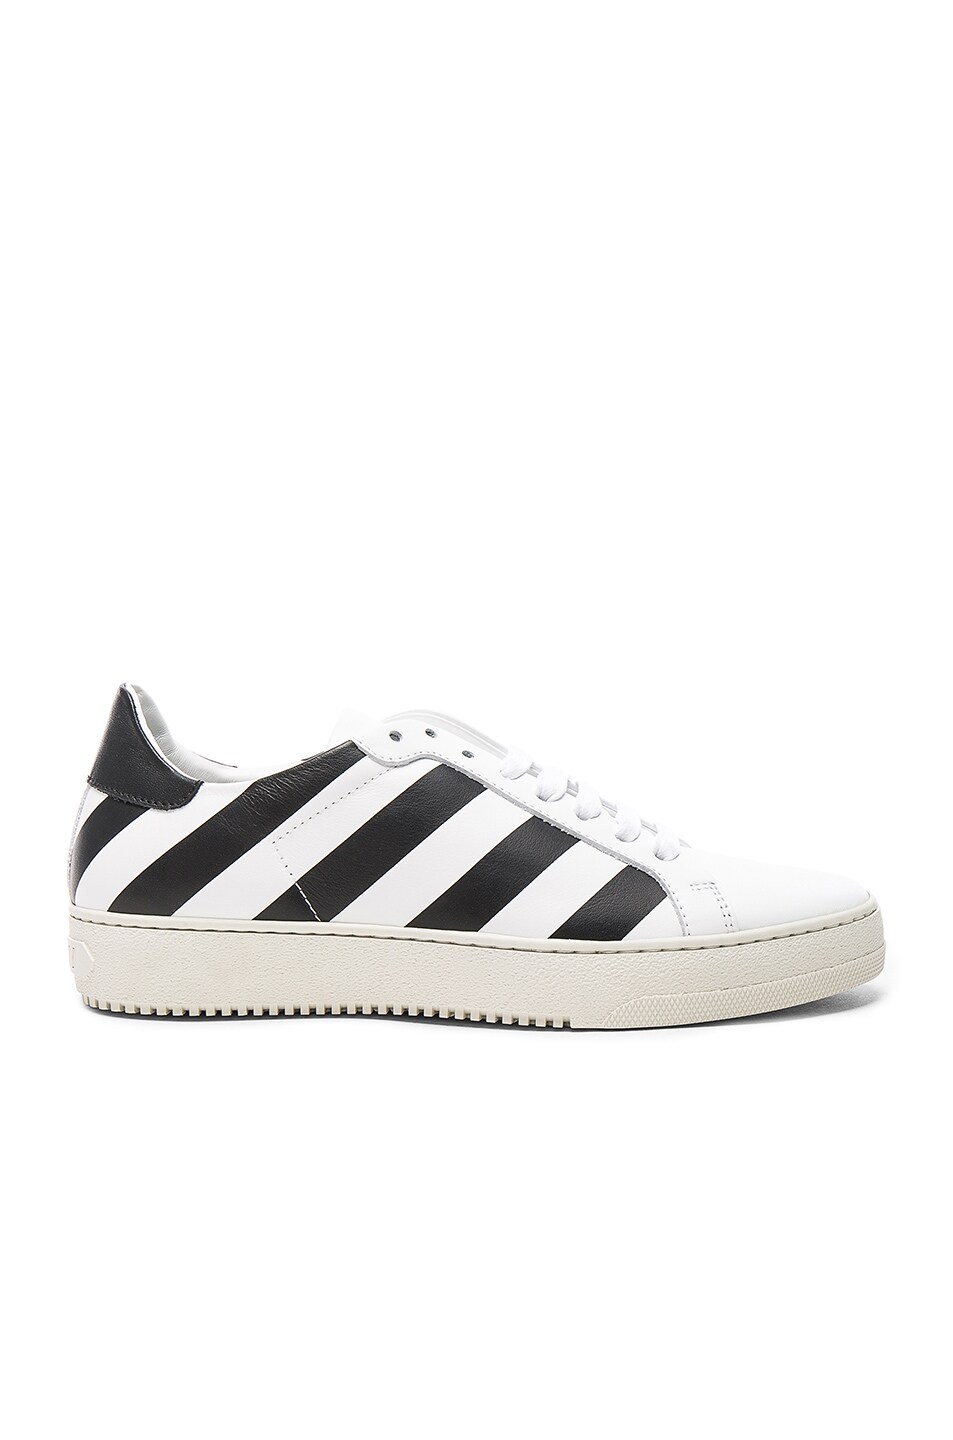 Image 1 of OFF-WHITE Classic Diagonals Leather Sneakers in Black & White